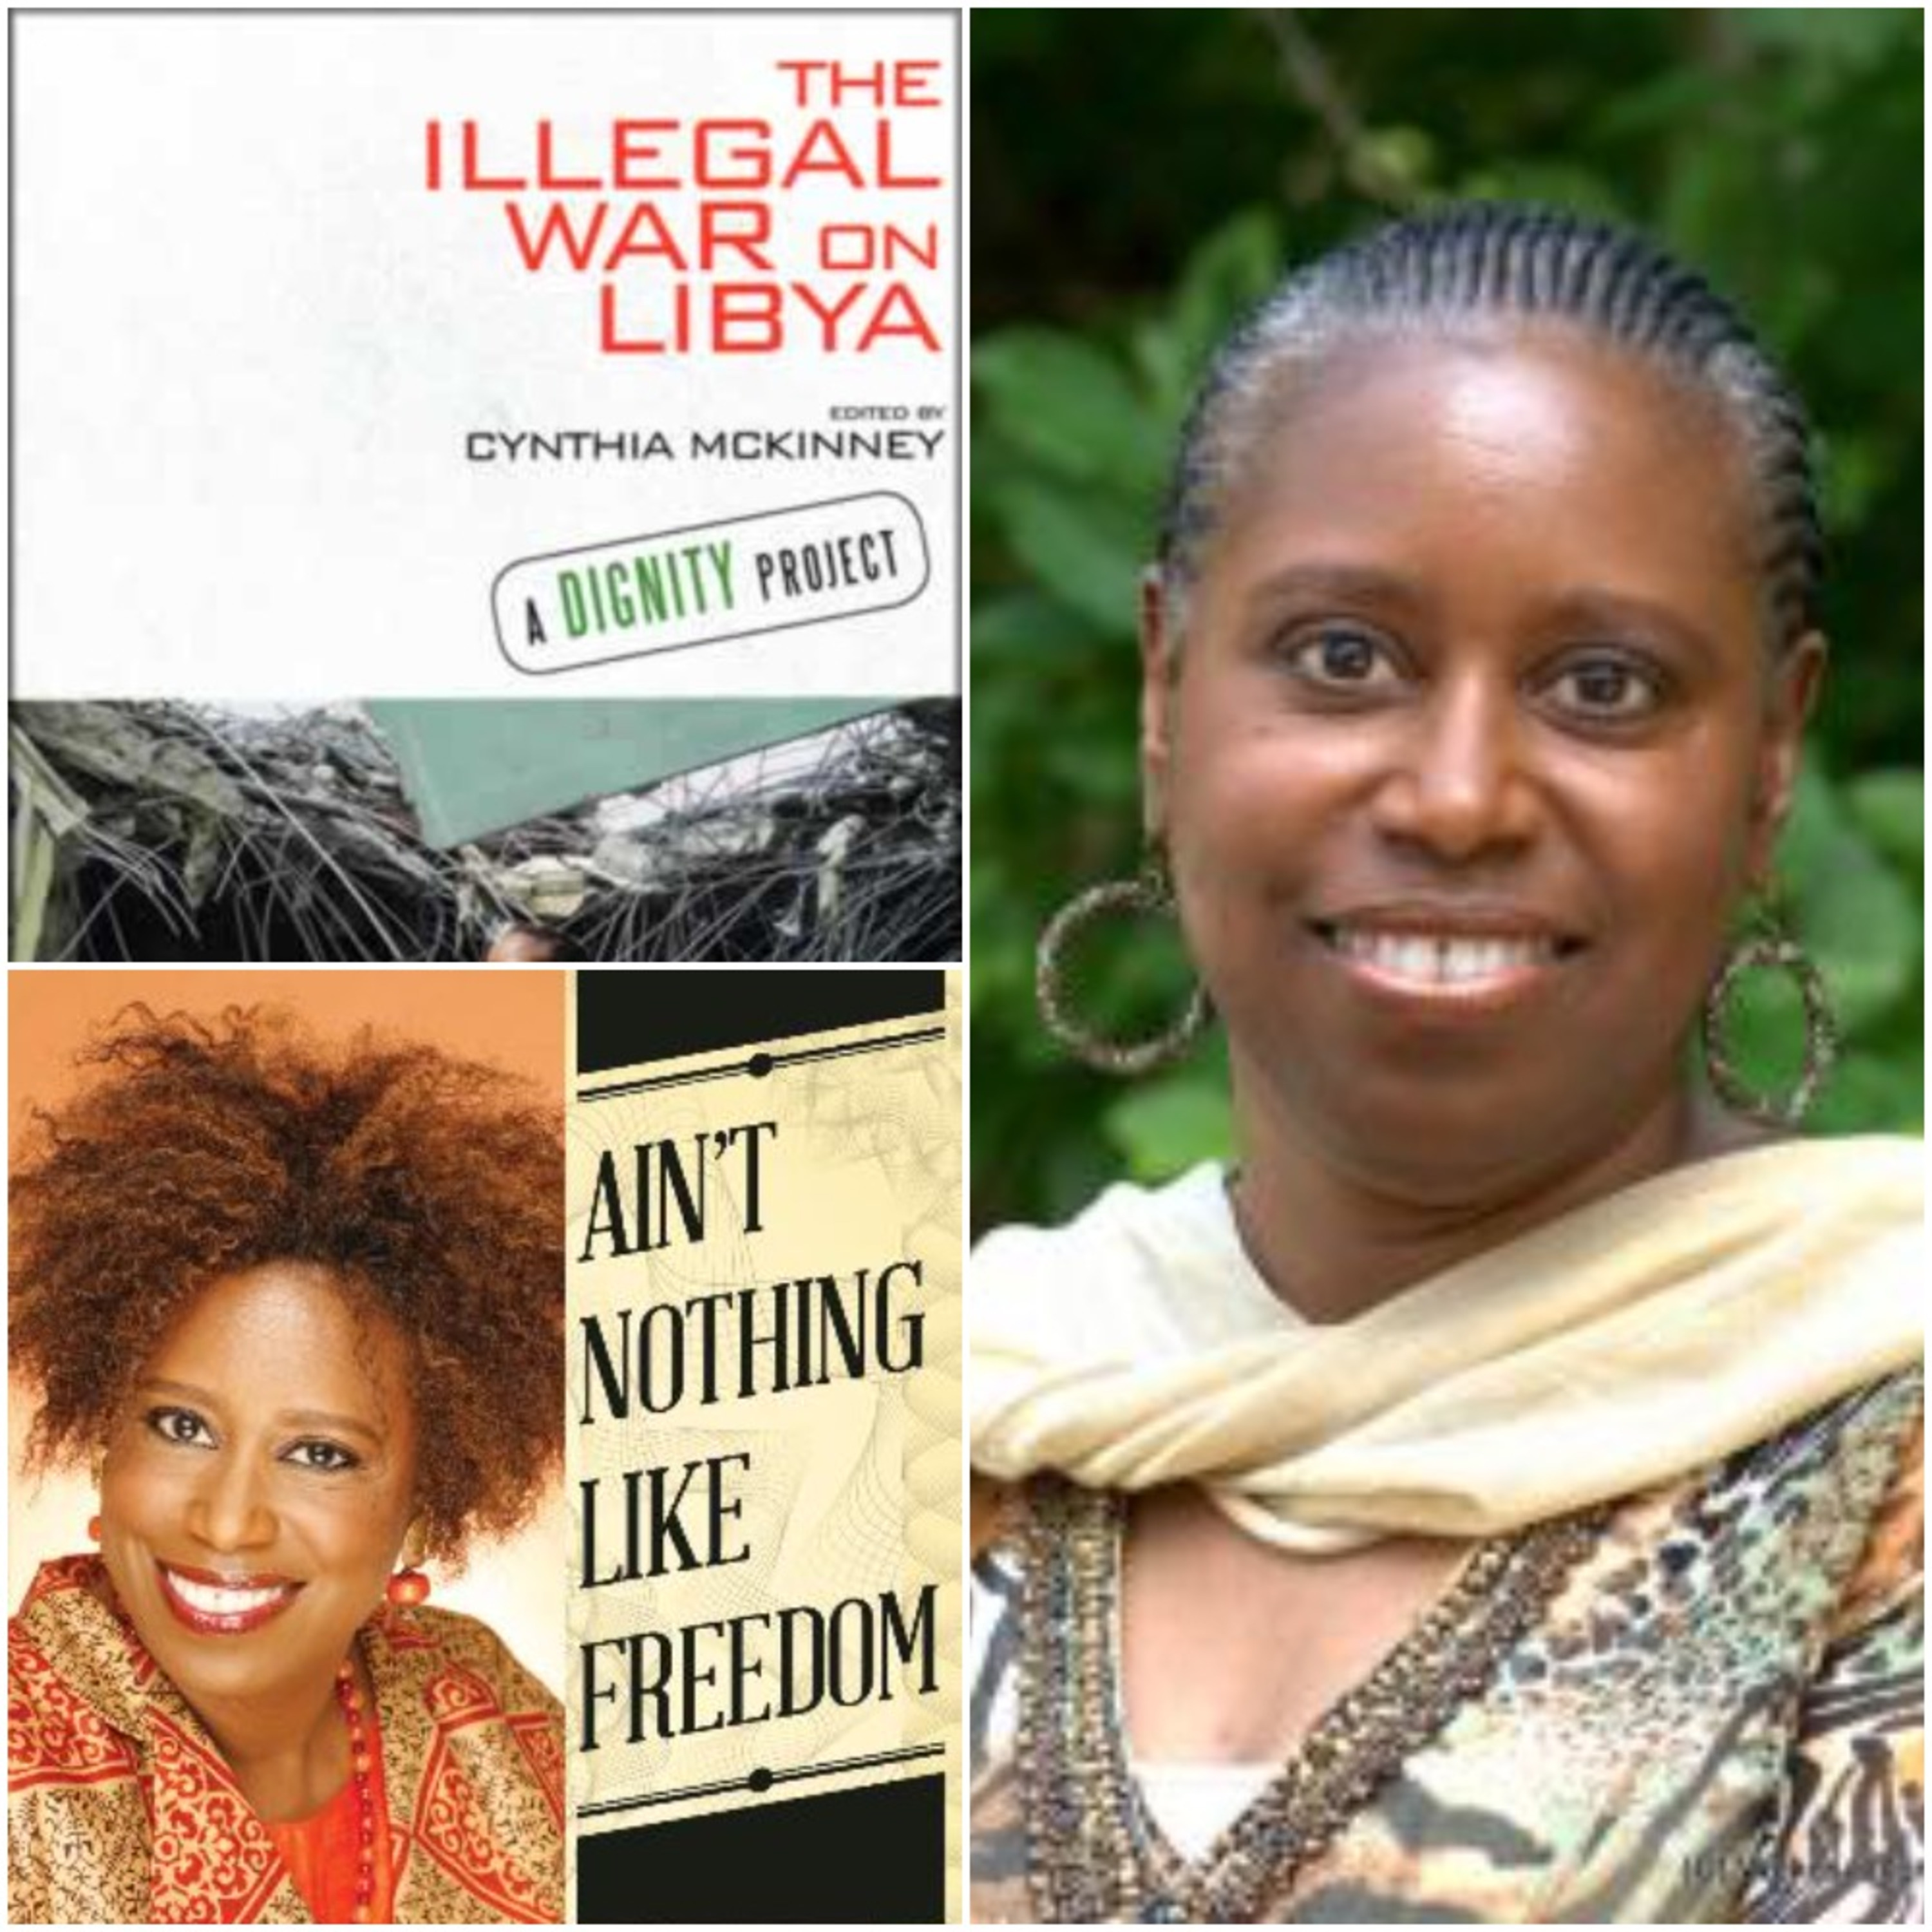 Dr. Cynthia McKinney and The Deep State